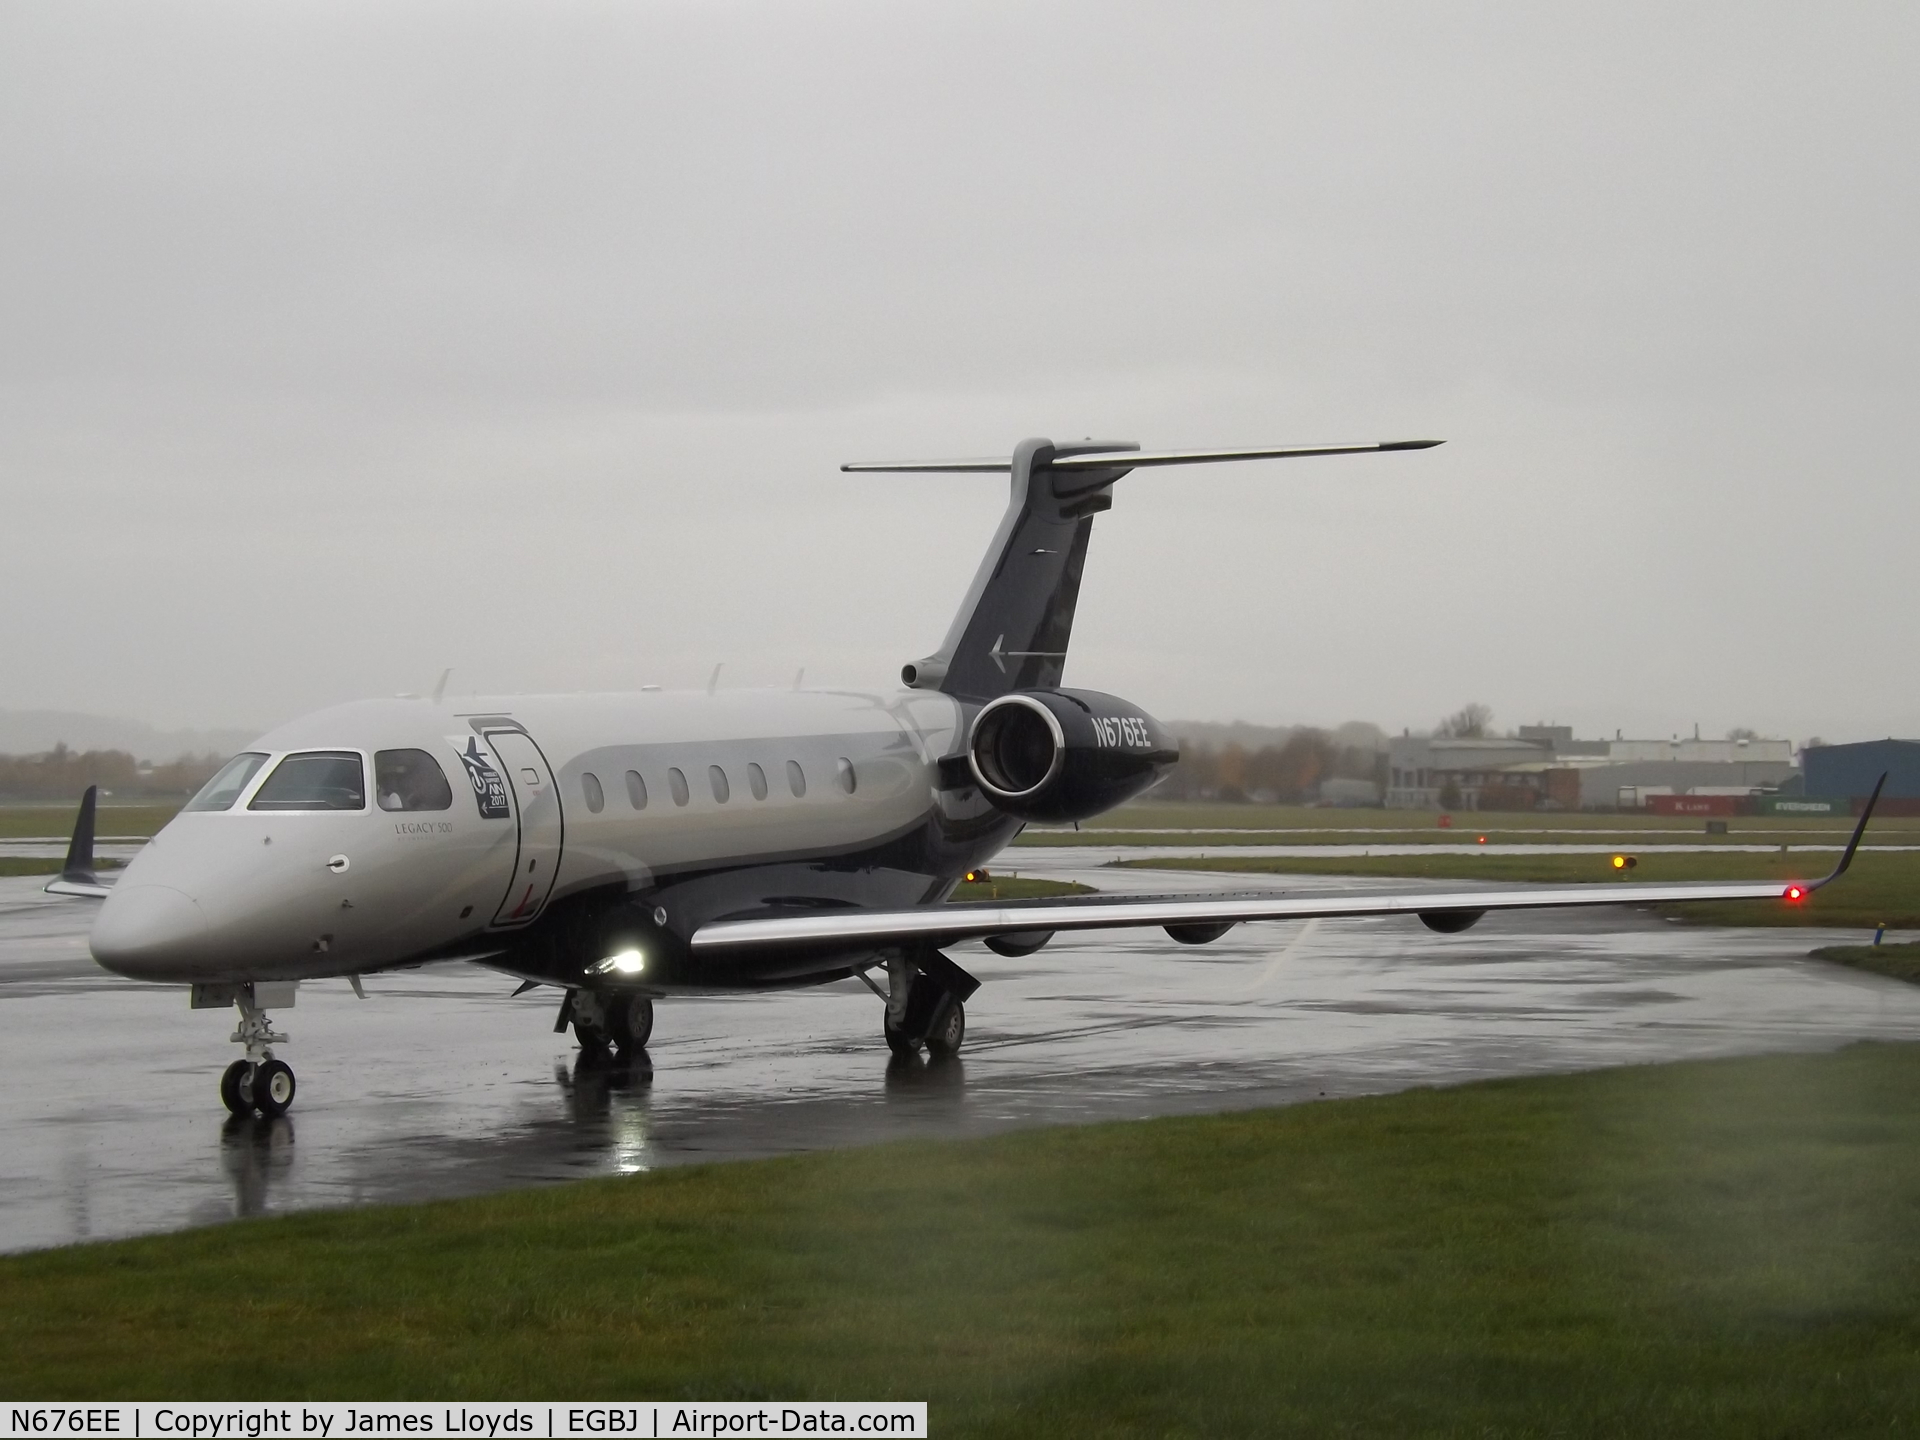 N676EE, 2018 Embraer EMB-550 Legacy 500 C/N 55000076, Taxing in at a wet Gloucestershire Airport.